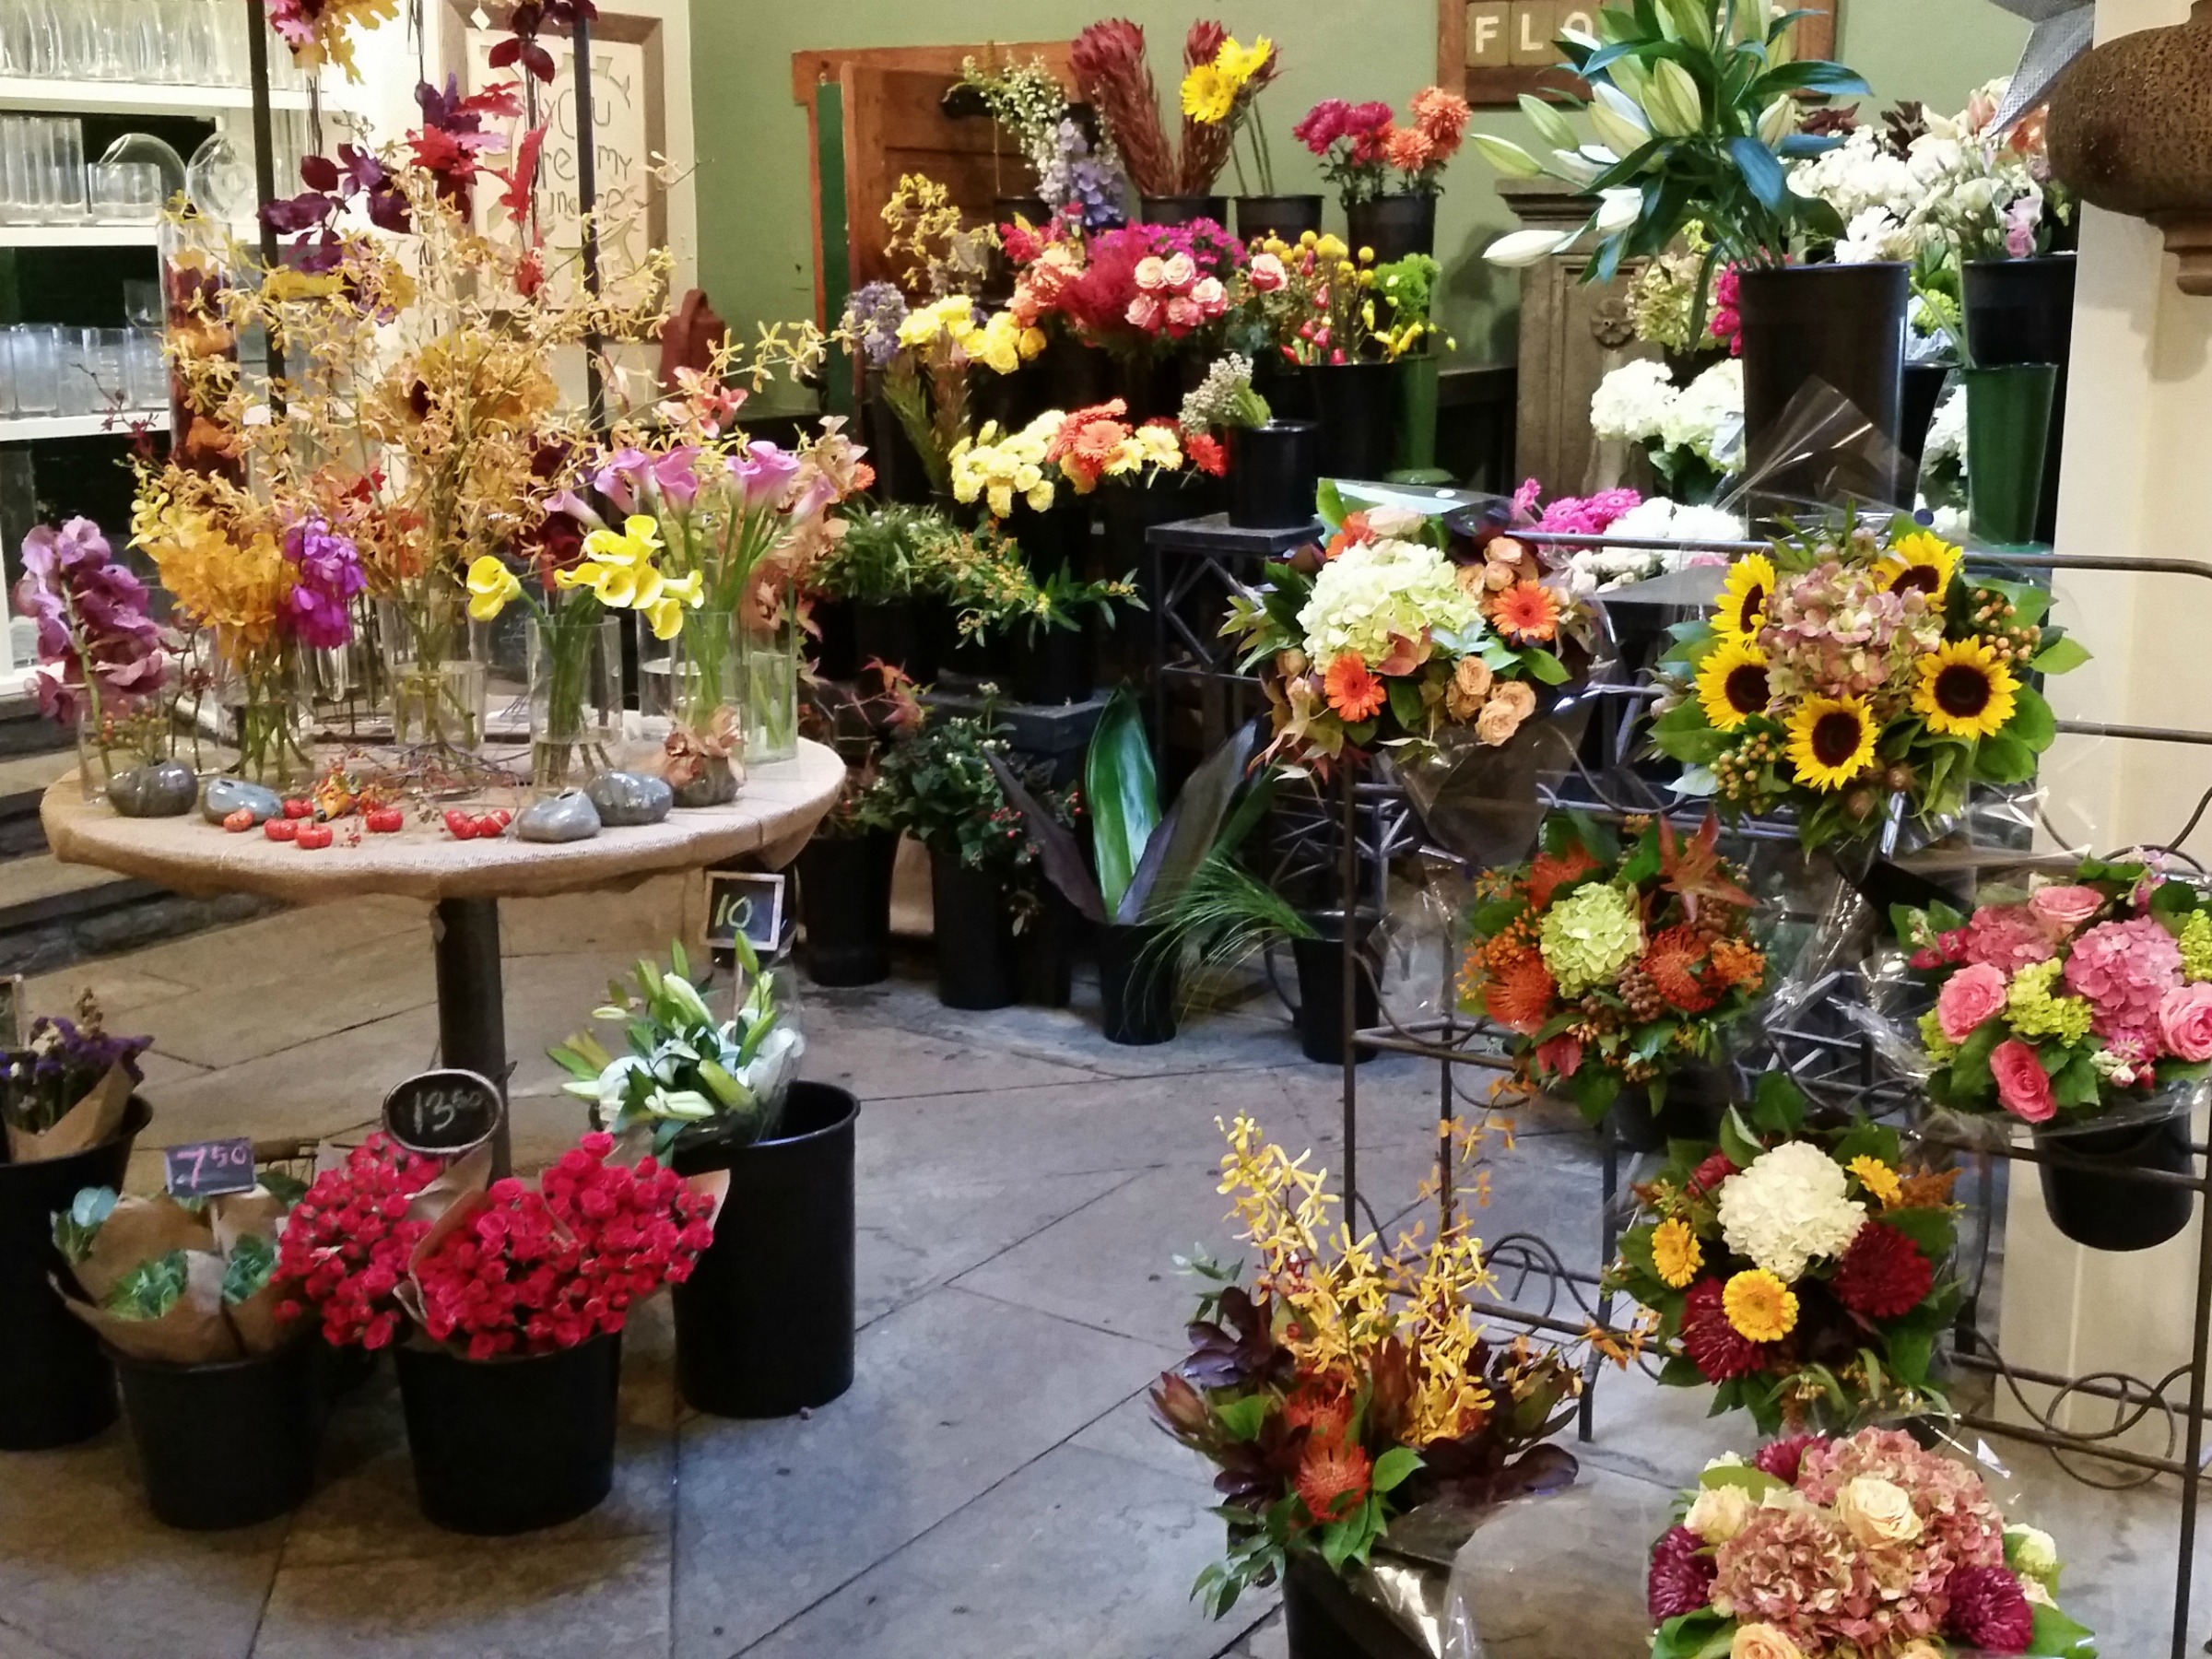 Shop our Chestnut Hill store for all your holiday needs from fresh flowers & plants to candles & linens, home & personal decor.